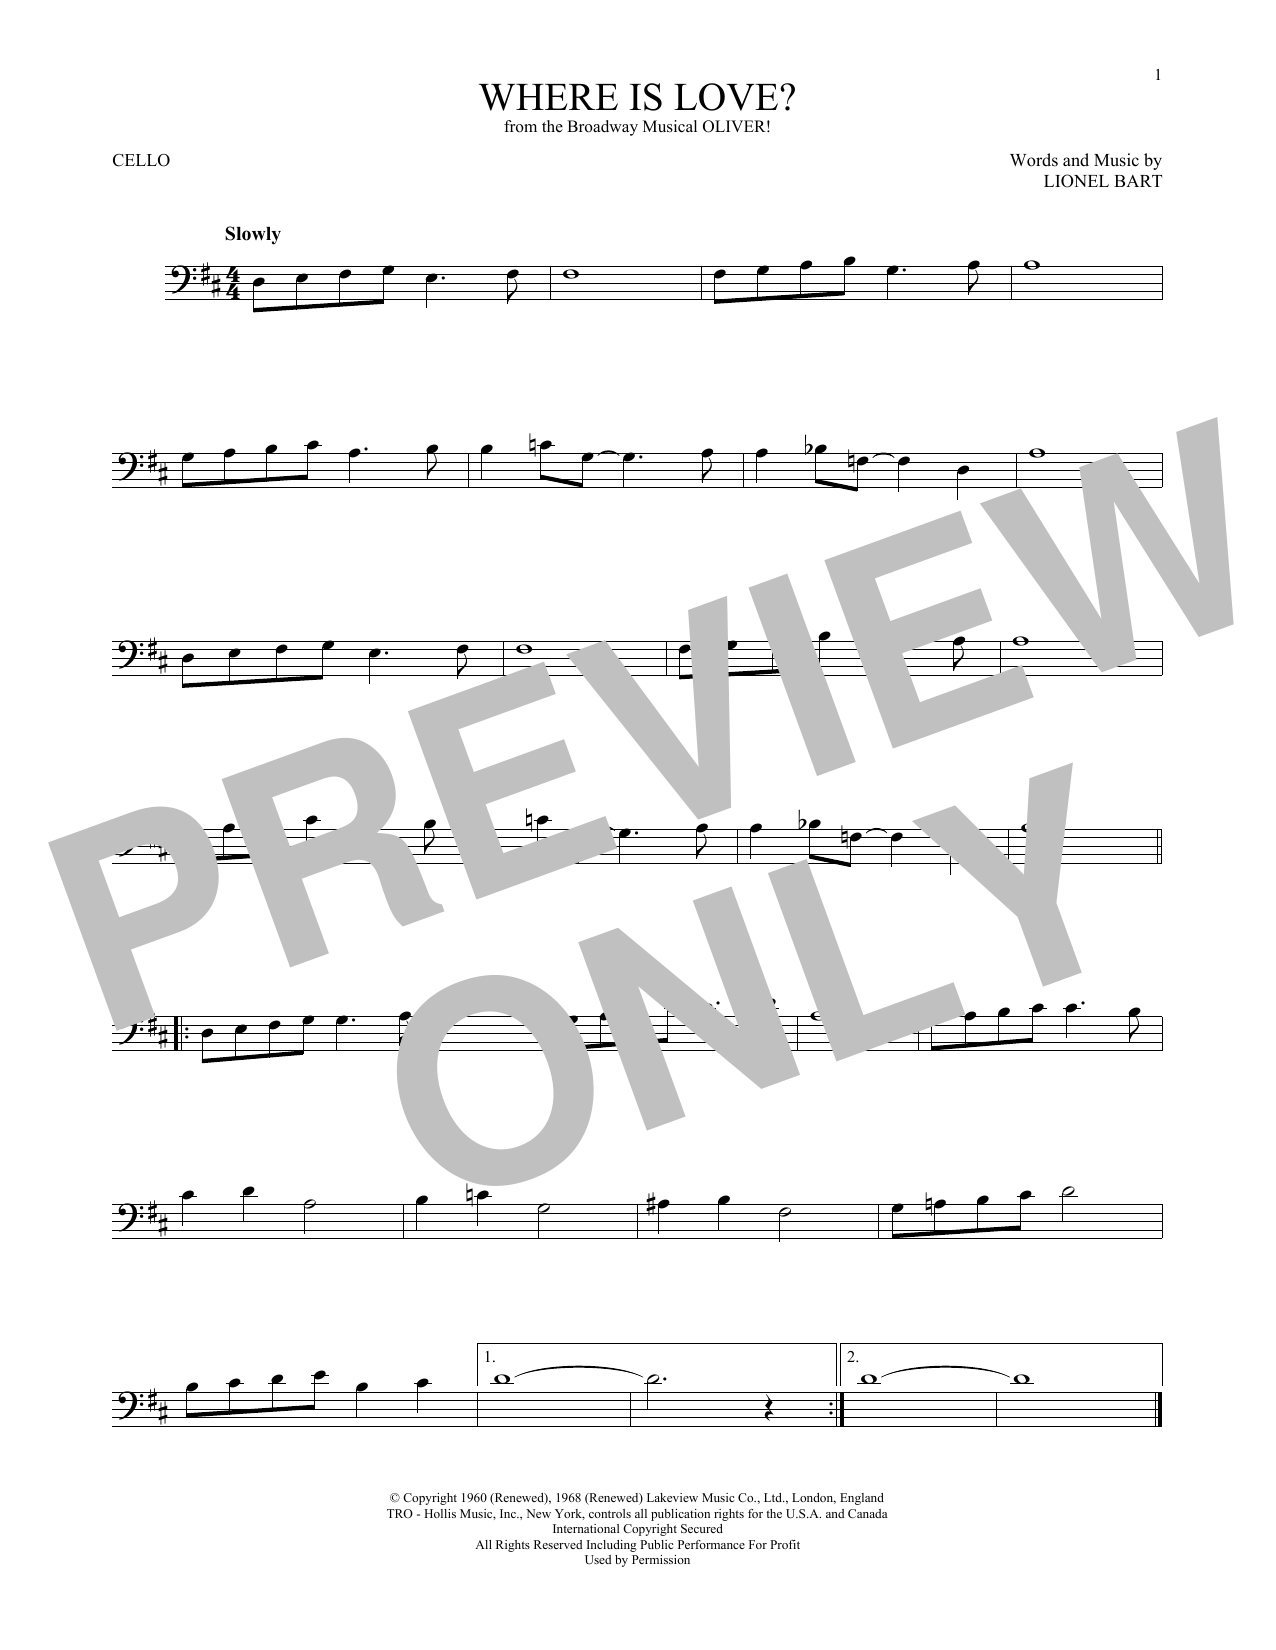 Download Lionel Bart Where Is Love? Sheet Music